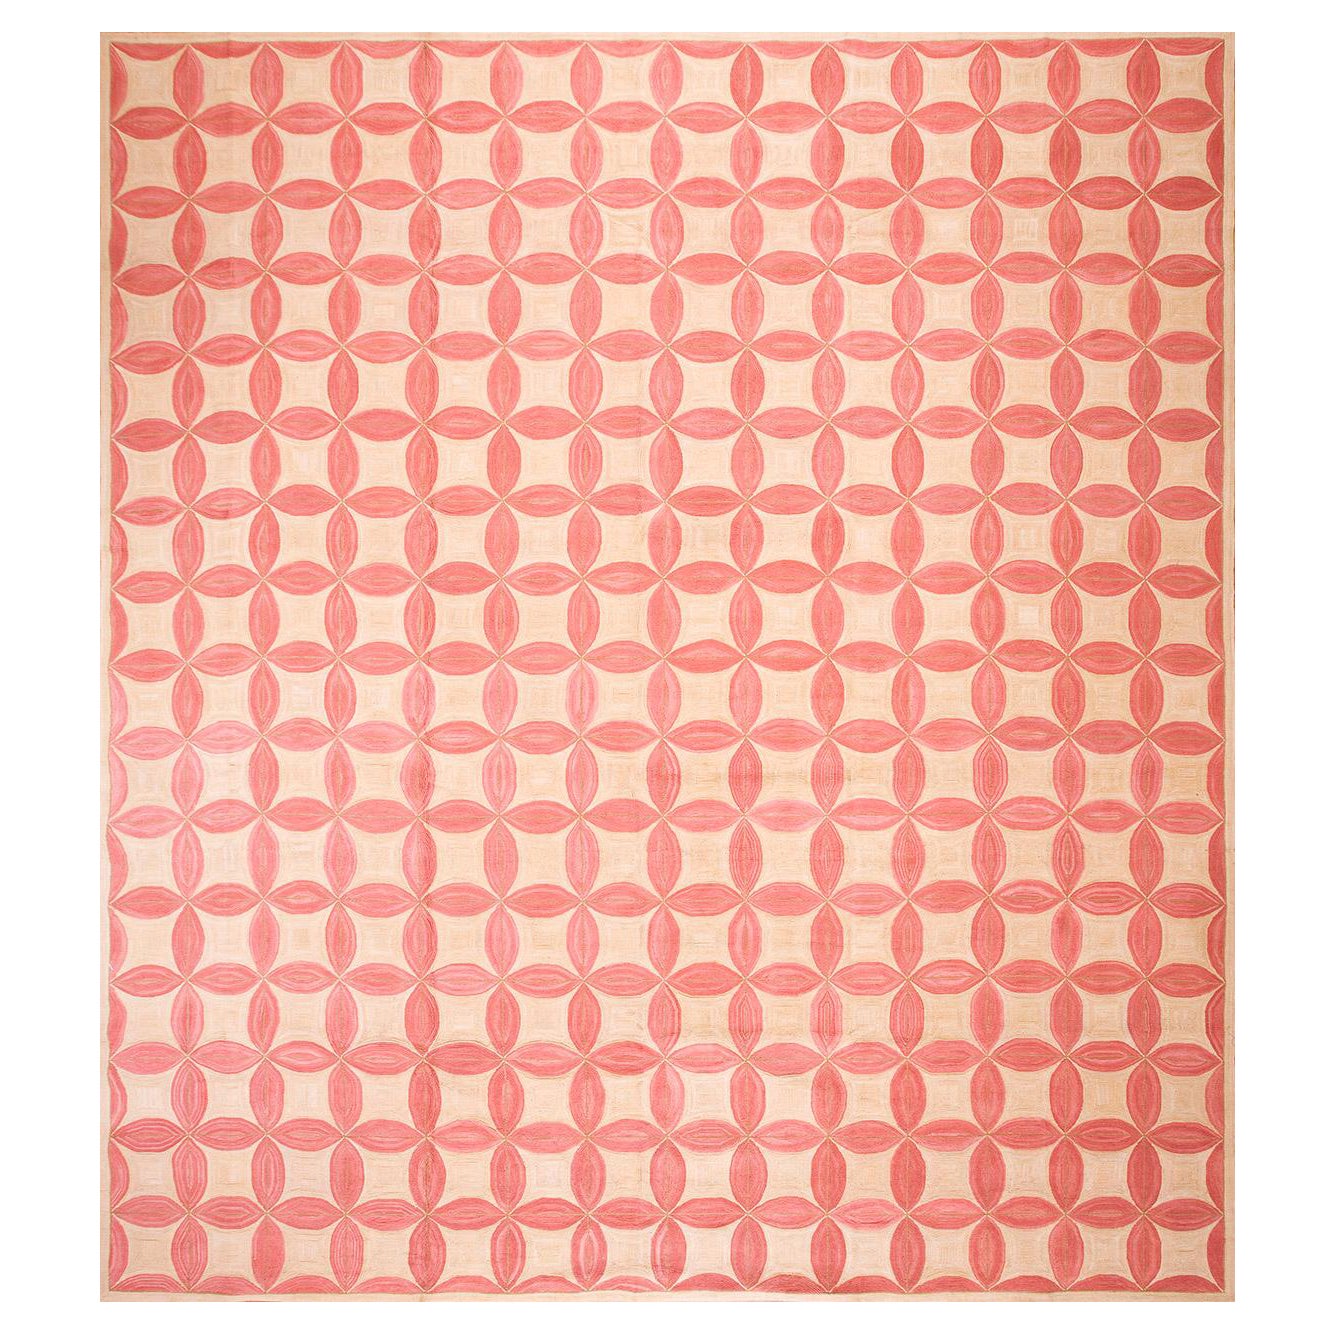 Contemporary Handmade Cotton Hooked Rug ( 8' x 10' - 244 x 305cm ) For Sale